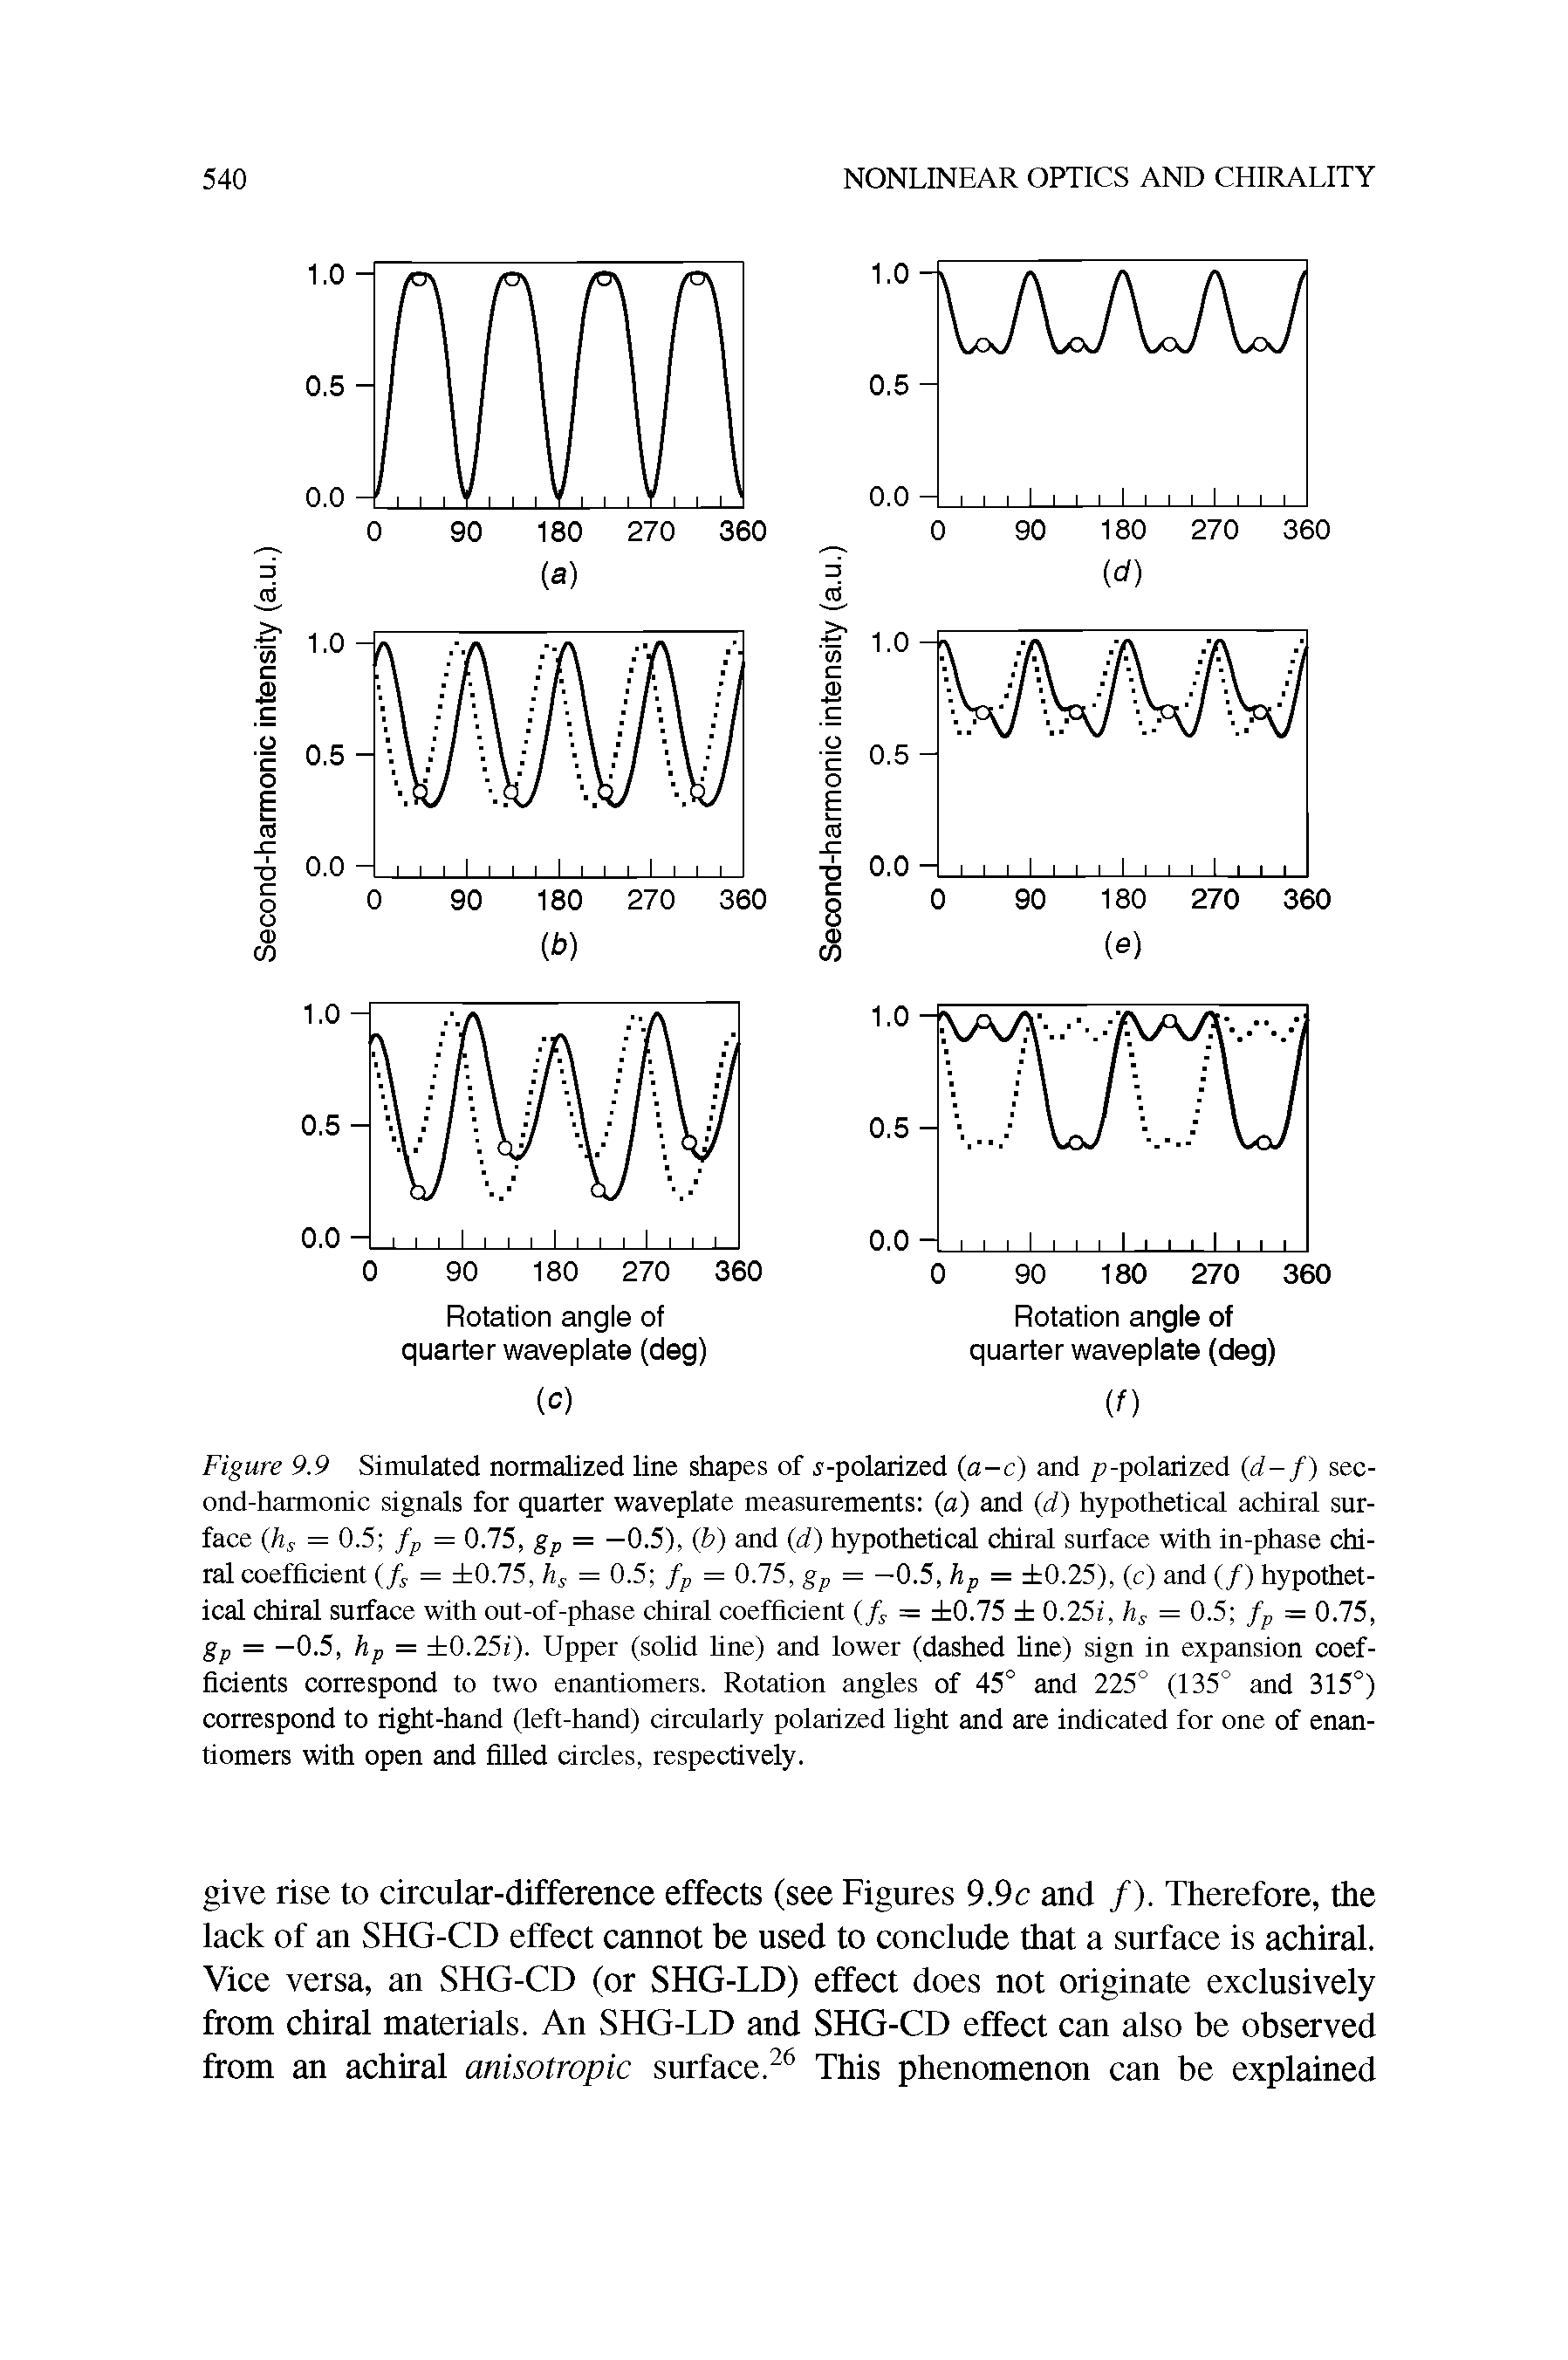 Figure 9.9 Simulated normalized line shapes of -polarized (a-c) and p-polarized (if-/) second-harmonic signals for quarter waveplate measurements (a) and (if) hypothetical achiral surface (hs = 0.5 fp = 0.75, gp = —0.5), (b) and (if) hypothetical chiral surface with in-phase chiral coefficient (fs = 0.75, hs = 0.5 fp = 0.75, gp = —0.5, hp = 0.25), (c) and (/) hypothetical chiral surface with out-of-phase chiral coefficient ( fs = 0.75 0.25i, hs = 0.5 fp = 0.75, gp = —0.5, hp = 0.25z). Upper (solid line) and lower (dashed line) sign in expansion coefficients correspond to two enantiomers. Rotation angles of 45° and 225° (135° and 315°) correspond to right-hand (left-hand) circularly polarized light and are indicated for one of enantiomers with open and filled circles, respectively.